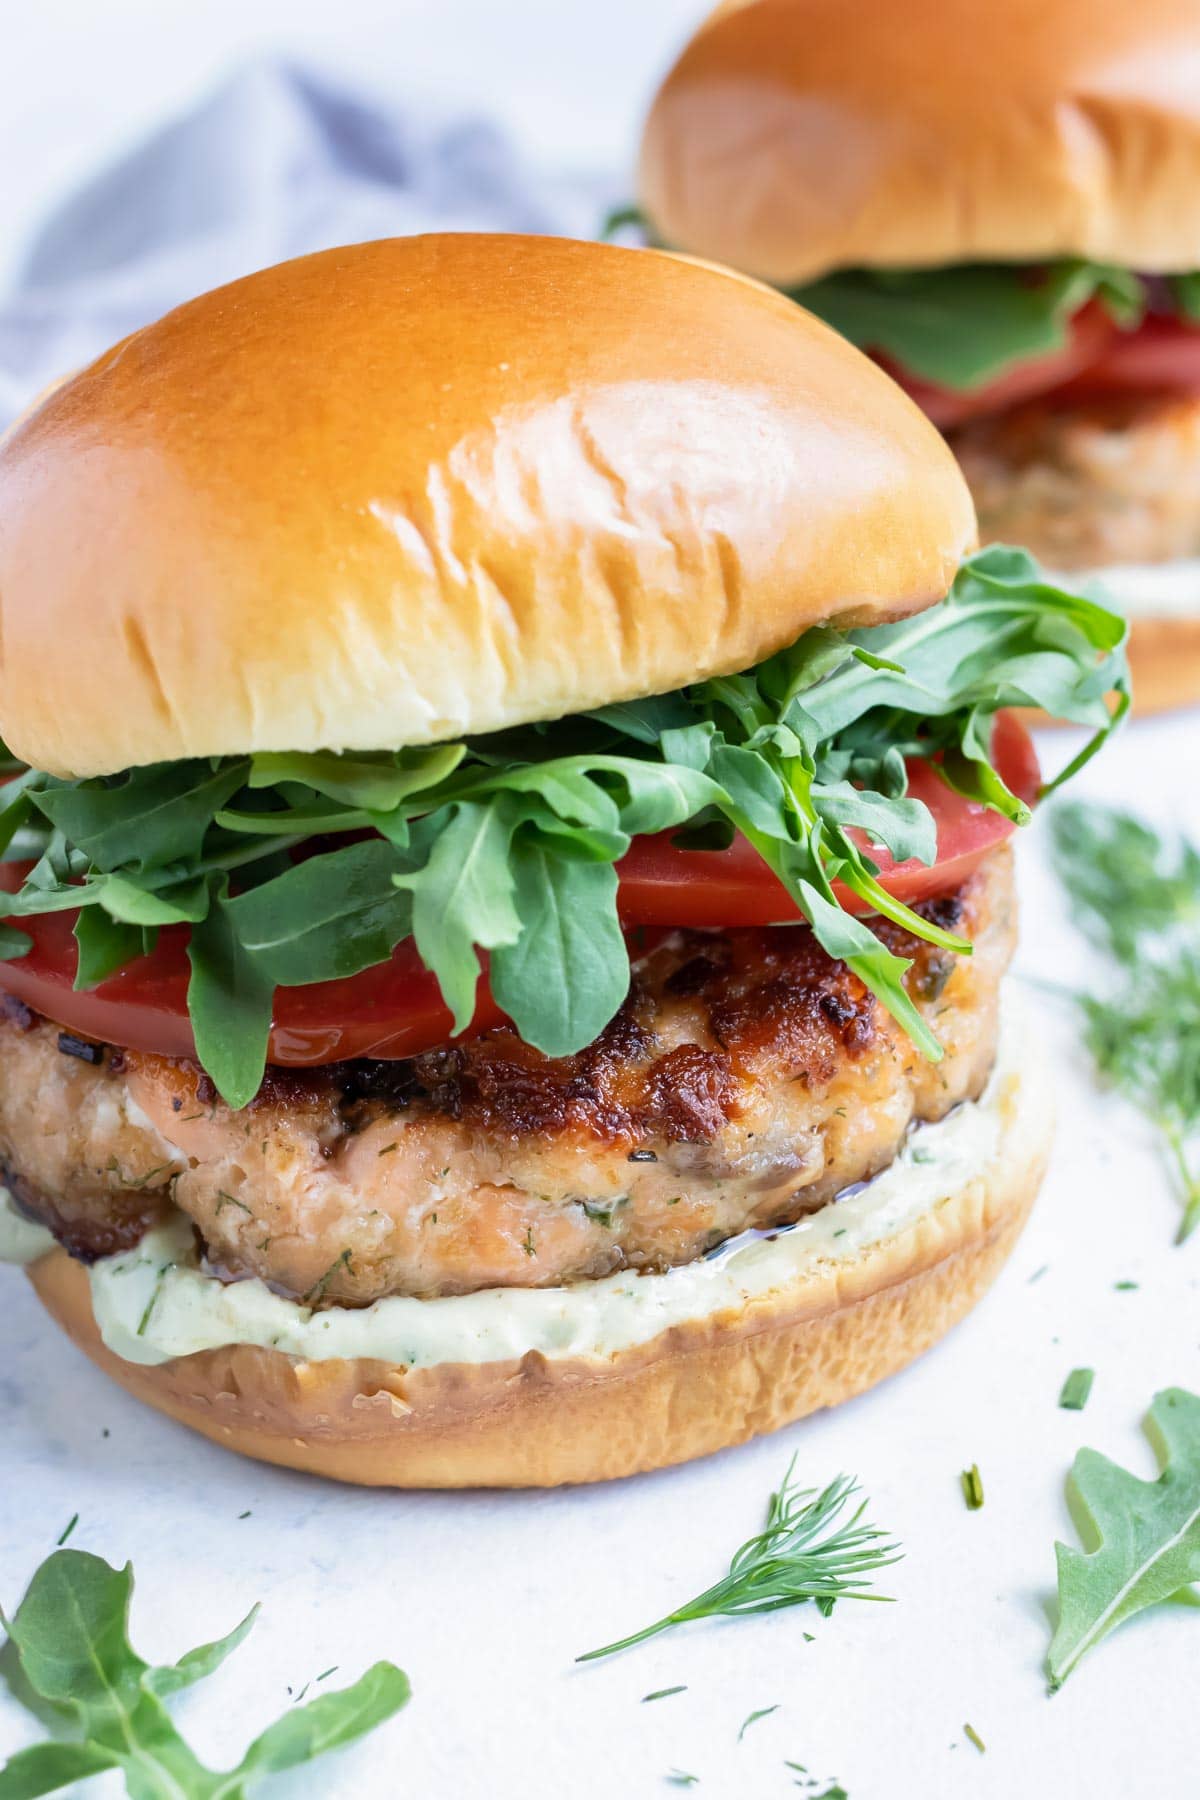 Salmon burgers are served for a healthy seafood dish.